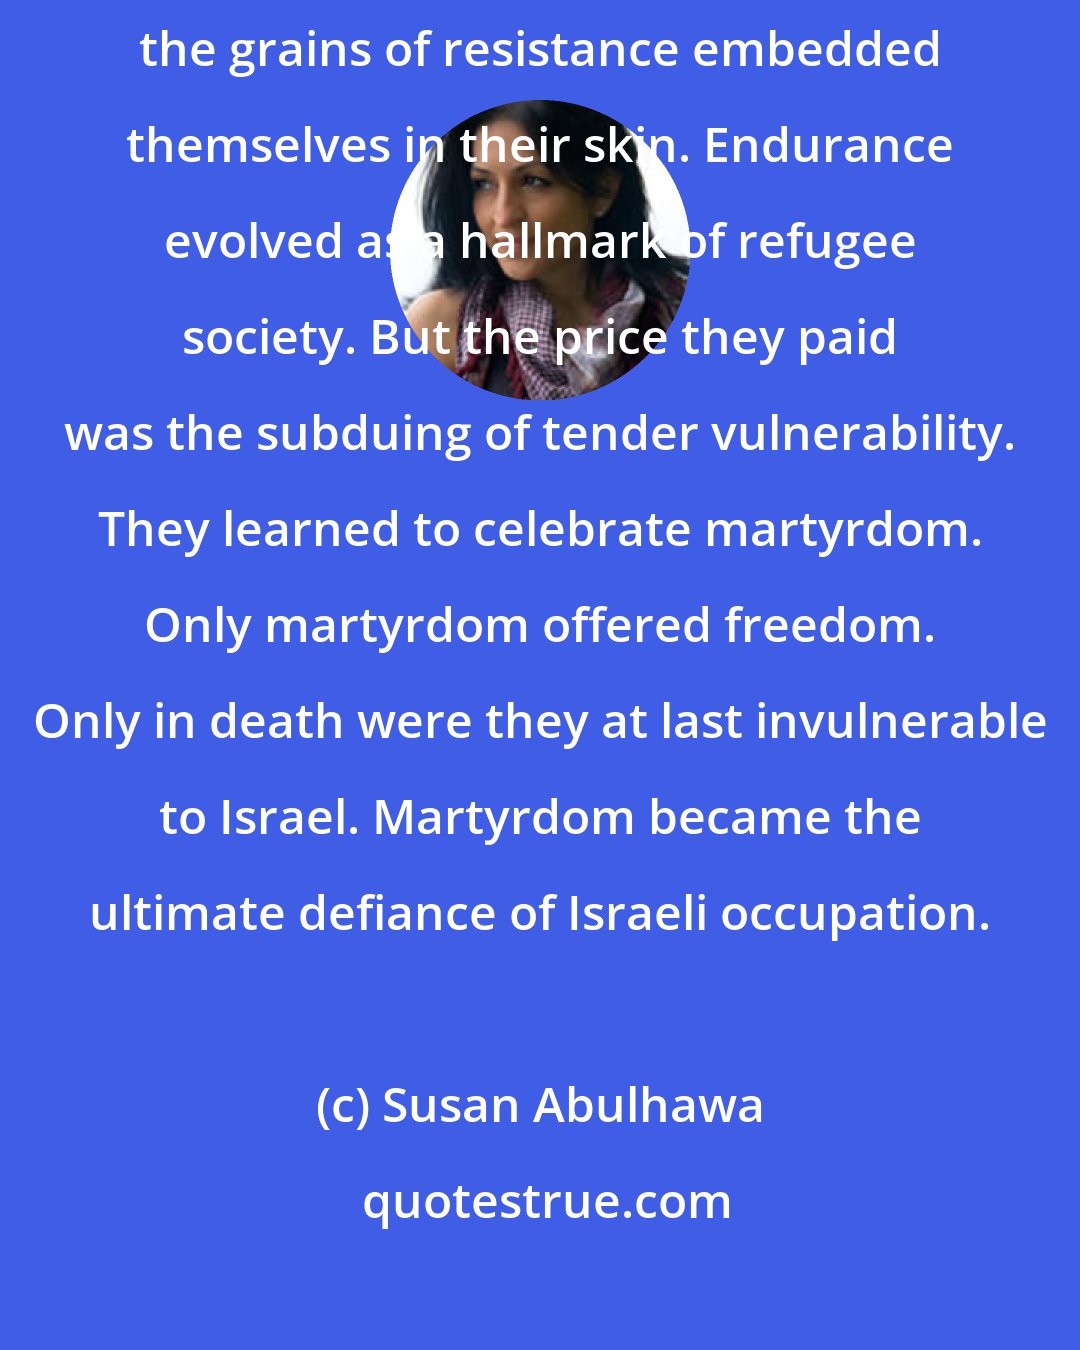 Susan Abulhawa: Toughness found fertile soil in the hearts of Palestinians, and the grains of resistance embedded themselves in their skin. Endurance evolved as a hallmark of refugee society. But the price they paid was the subduing of tender vulnerability. They learned to celebrate martyrdom. Only martyrdom offered freedom. Only in death were they at last invulnerable to Israel. Martyrdom became the ultimate defiance of Israeli occupation.